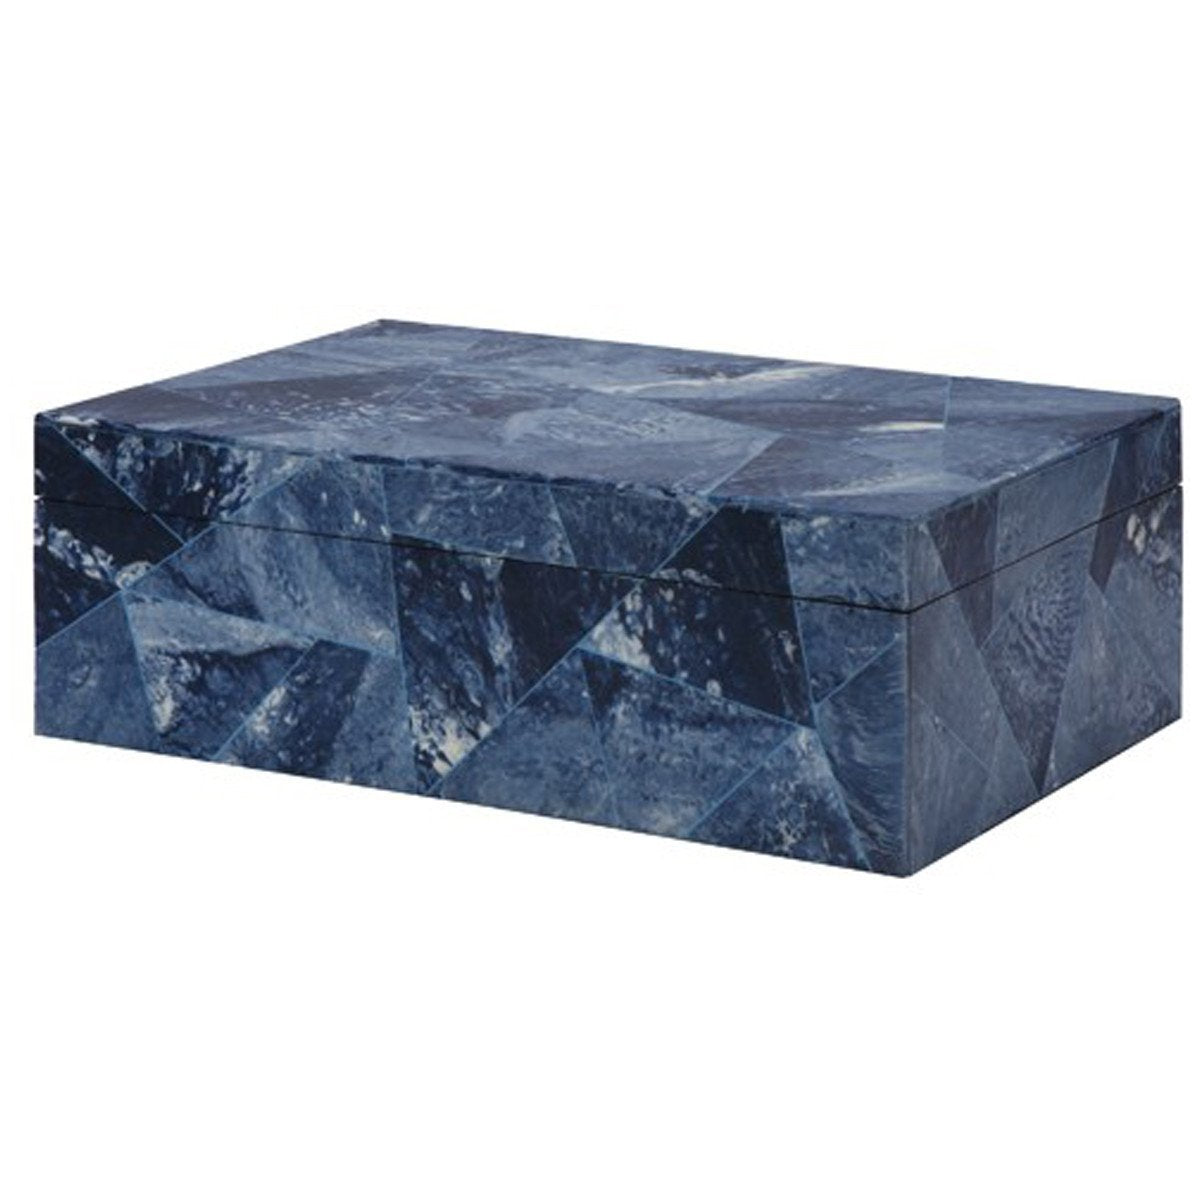 Worlds Away Hand Crafted Decorative Box in Various Blues